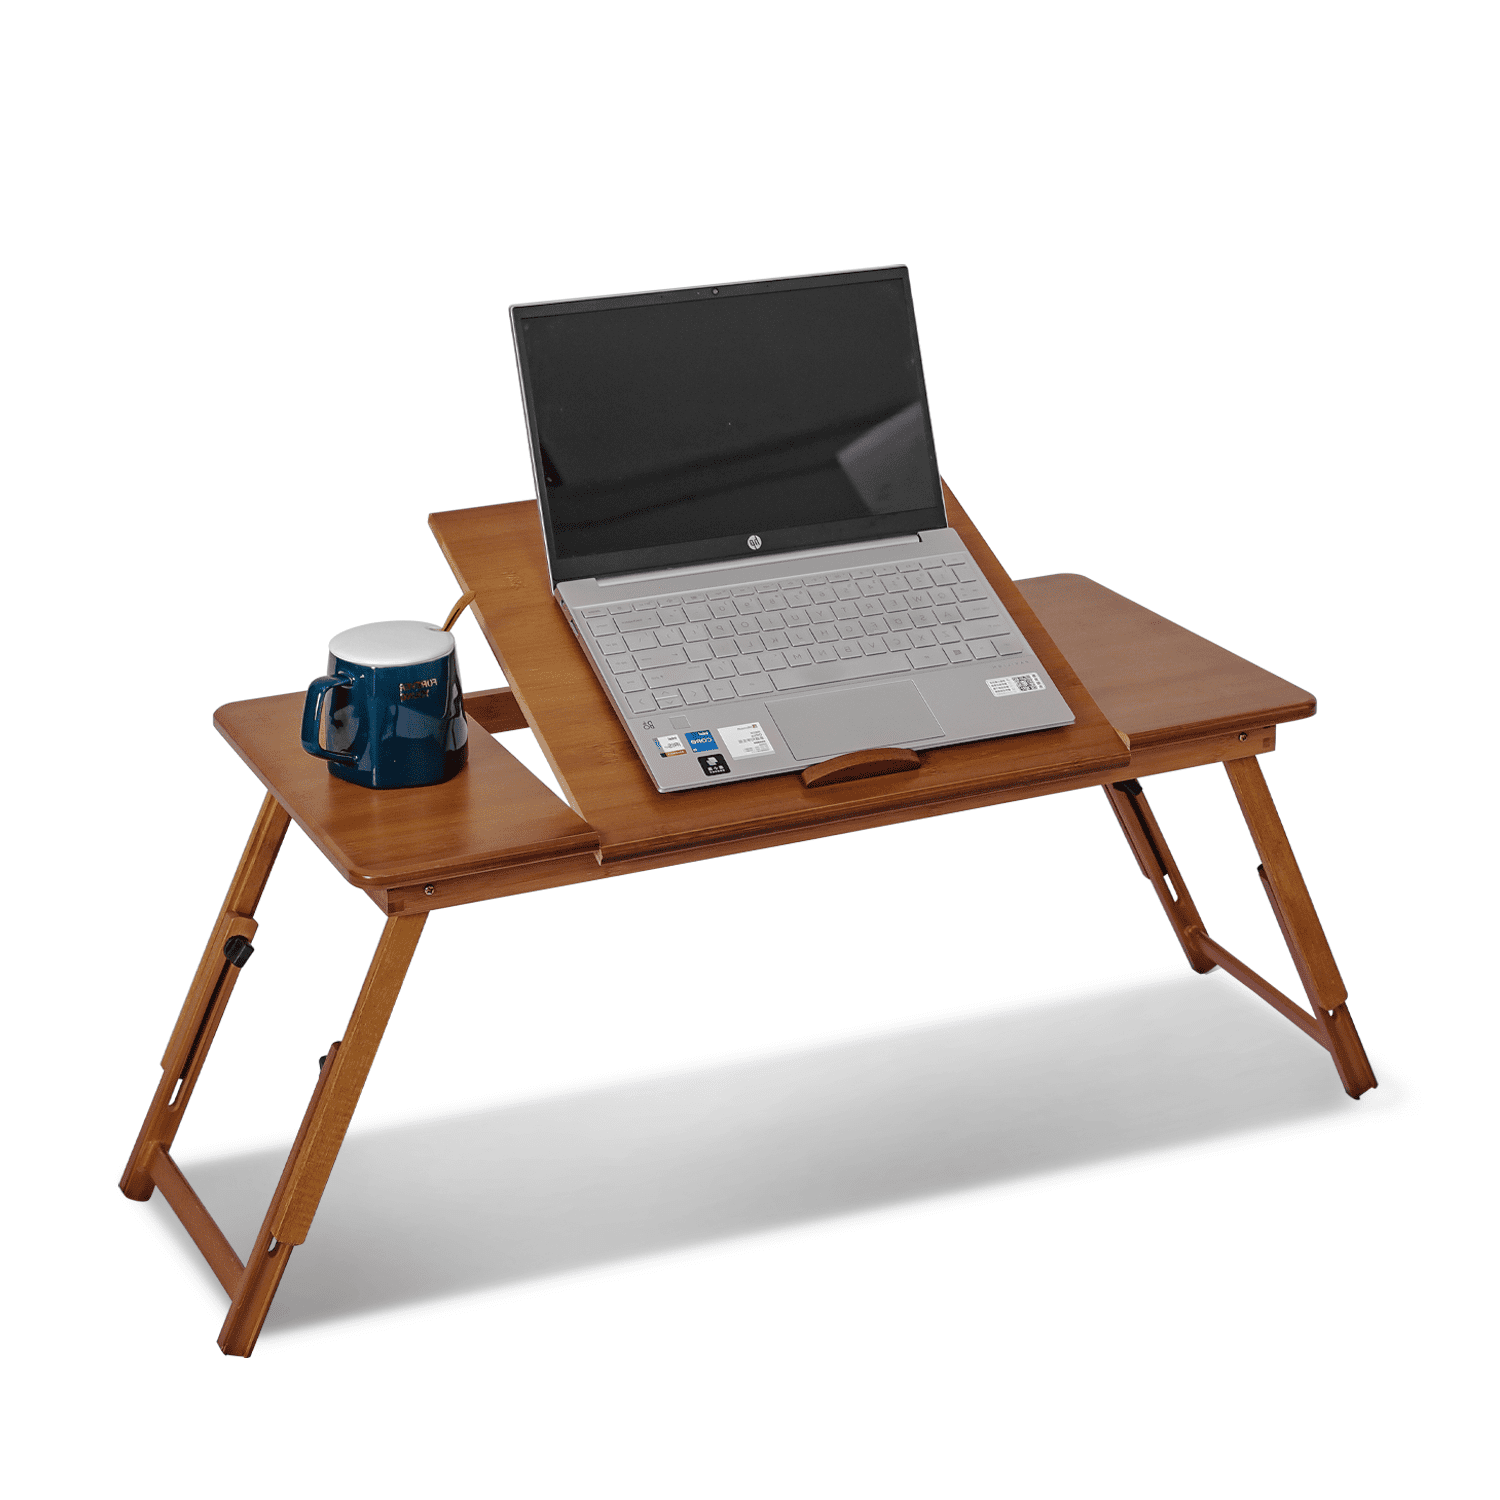 Bamboo Laptop Desk Adjustable Breakfast Serving Bed Tray with Tilting Top Drawer 